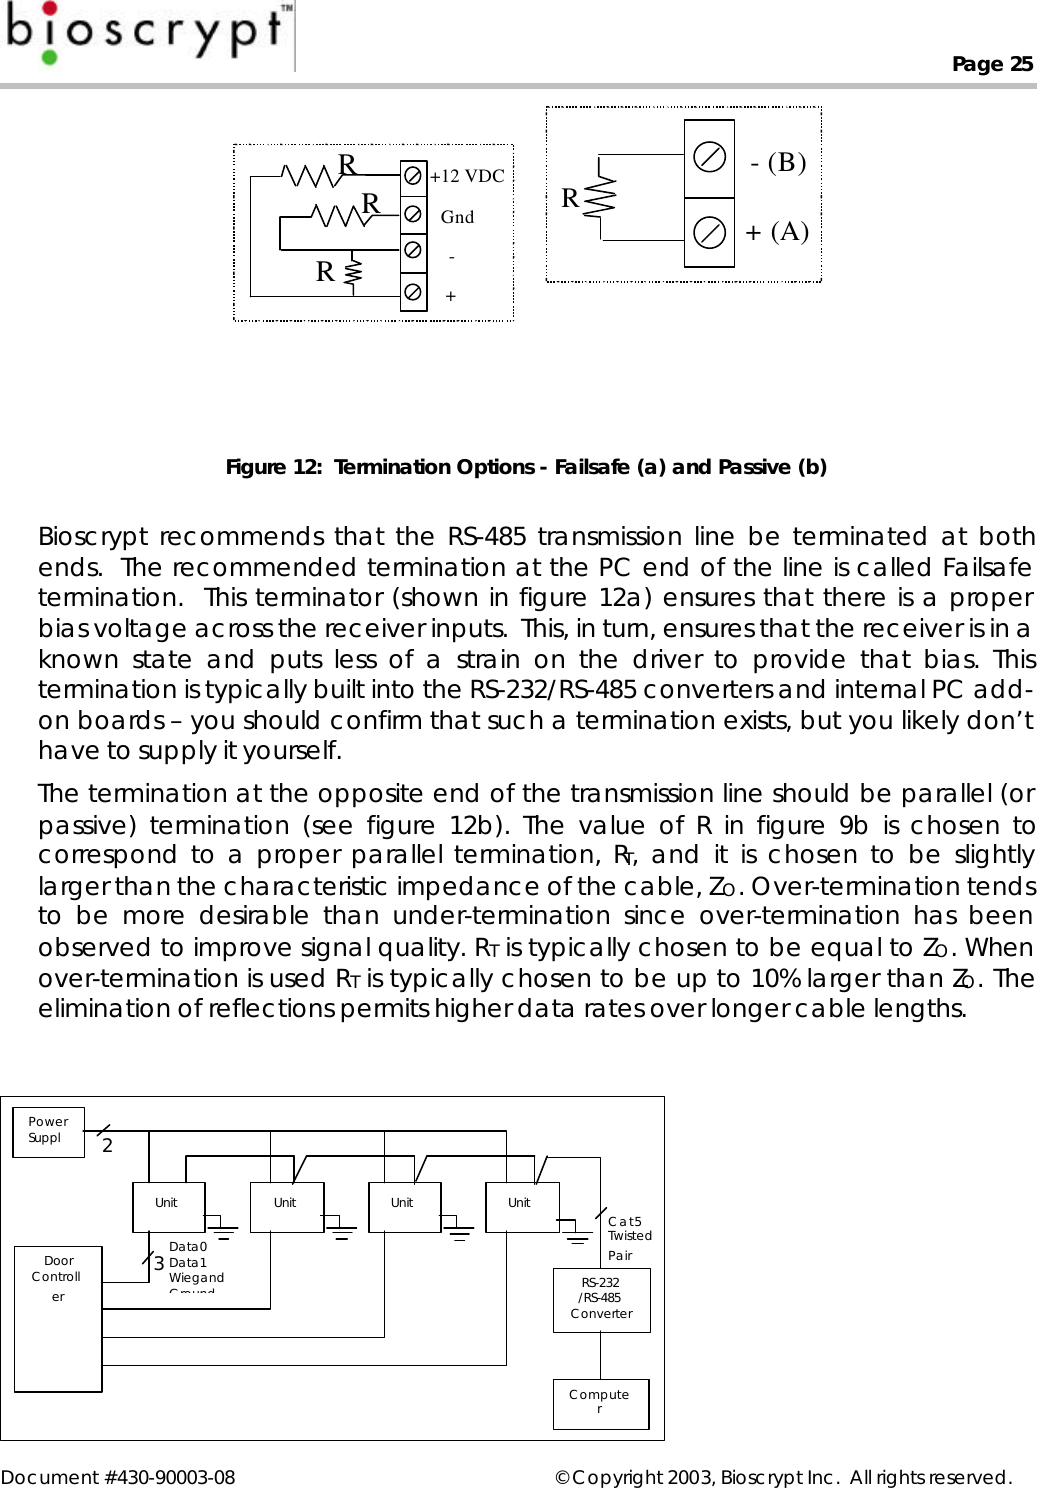 Page 25Document #430-90003-08 © Copyright 2003, Bioscrypt Inc.  All rights reserved.Figure 12:  Termination Options - Failsafe (a) and Passive (b)Bioscrypt recommends that the RS-485 transmission line be terminated at bothends.  The recommended termination at the PC end of the line is called Failsafetermination.  This terminator (shown in figure 12a) ensures that there is a properbias voltage across the receiver inputs.  This, in turn, ensures that the receiver is in aknown state and puts less of a strain on the driver to provide that bias. Thistermination is typically built into the RS-232/RS-485 converters and internal PC add-on boards – you should confirm that such a termination exists, but you likely don’thave to supply it yourself.The termination at the opposite end of the transmission line should be parallel (orpassive) termination (see figure 12b). The value of R in figure 9b is chosen tocorrespond to a proper parallel termination, RT, and it is chosen to be slightlylarger than the characteristic impedance of the cable, ZO. Over-termination tendsto be more desirable than under-termination since over-termination has beenobserved to improve signal quality. RT is typically chosen to be equal to ZO. Whenover-termination is used RT is typically chosen to be up to 10% larger than ZO. Theelimination of reflections permits higher data rates over longer cable lengths.PowerSupplyUnit Unit Unit Unit3Data0Data1WiegandGround2RS-232/RS-485ConverterCat5TwistedPairComputerDoorControllerR RR +12 VDC Gnd    -    +  R - (B) + (A) 